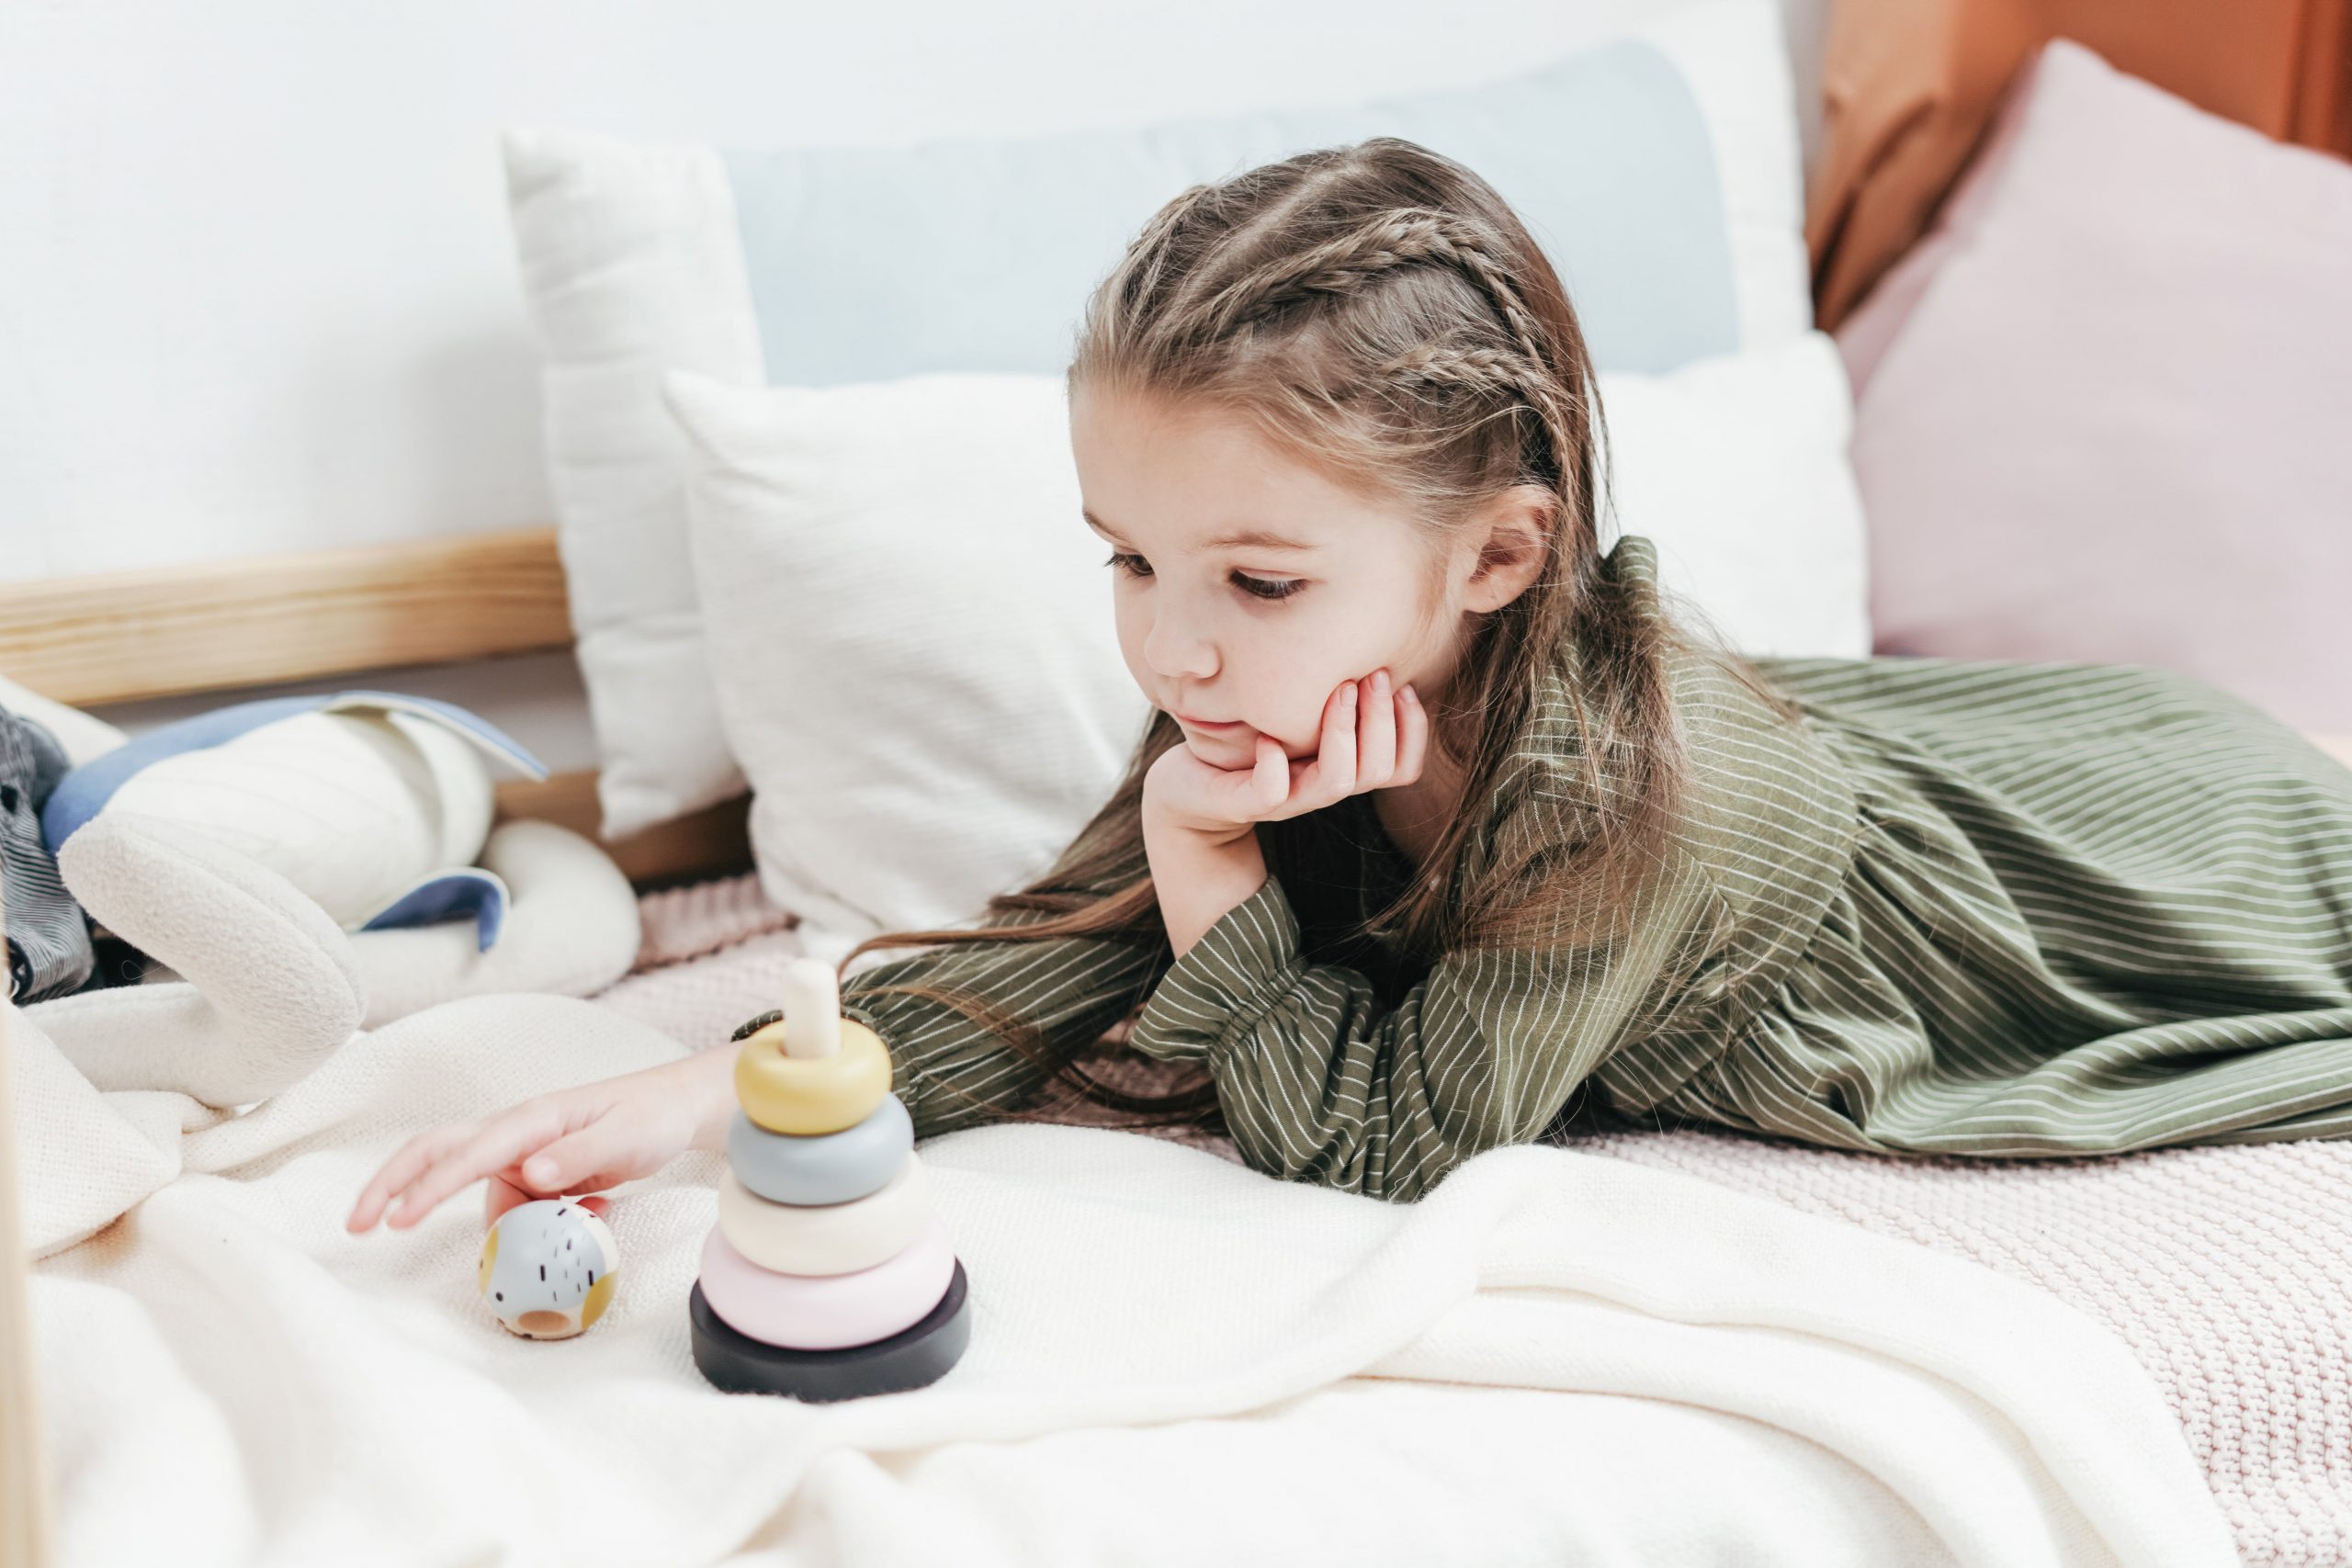 A contemplative young girl lies on a bed playing with a wooden toy, surrounded by pillows. 